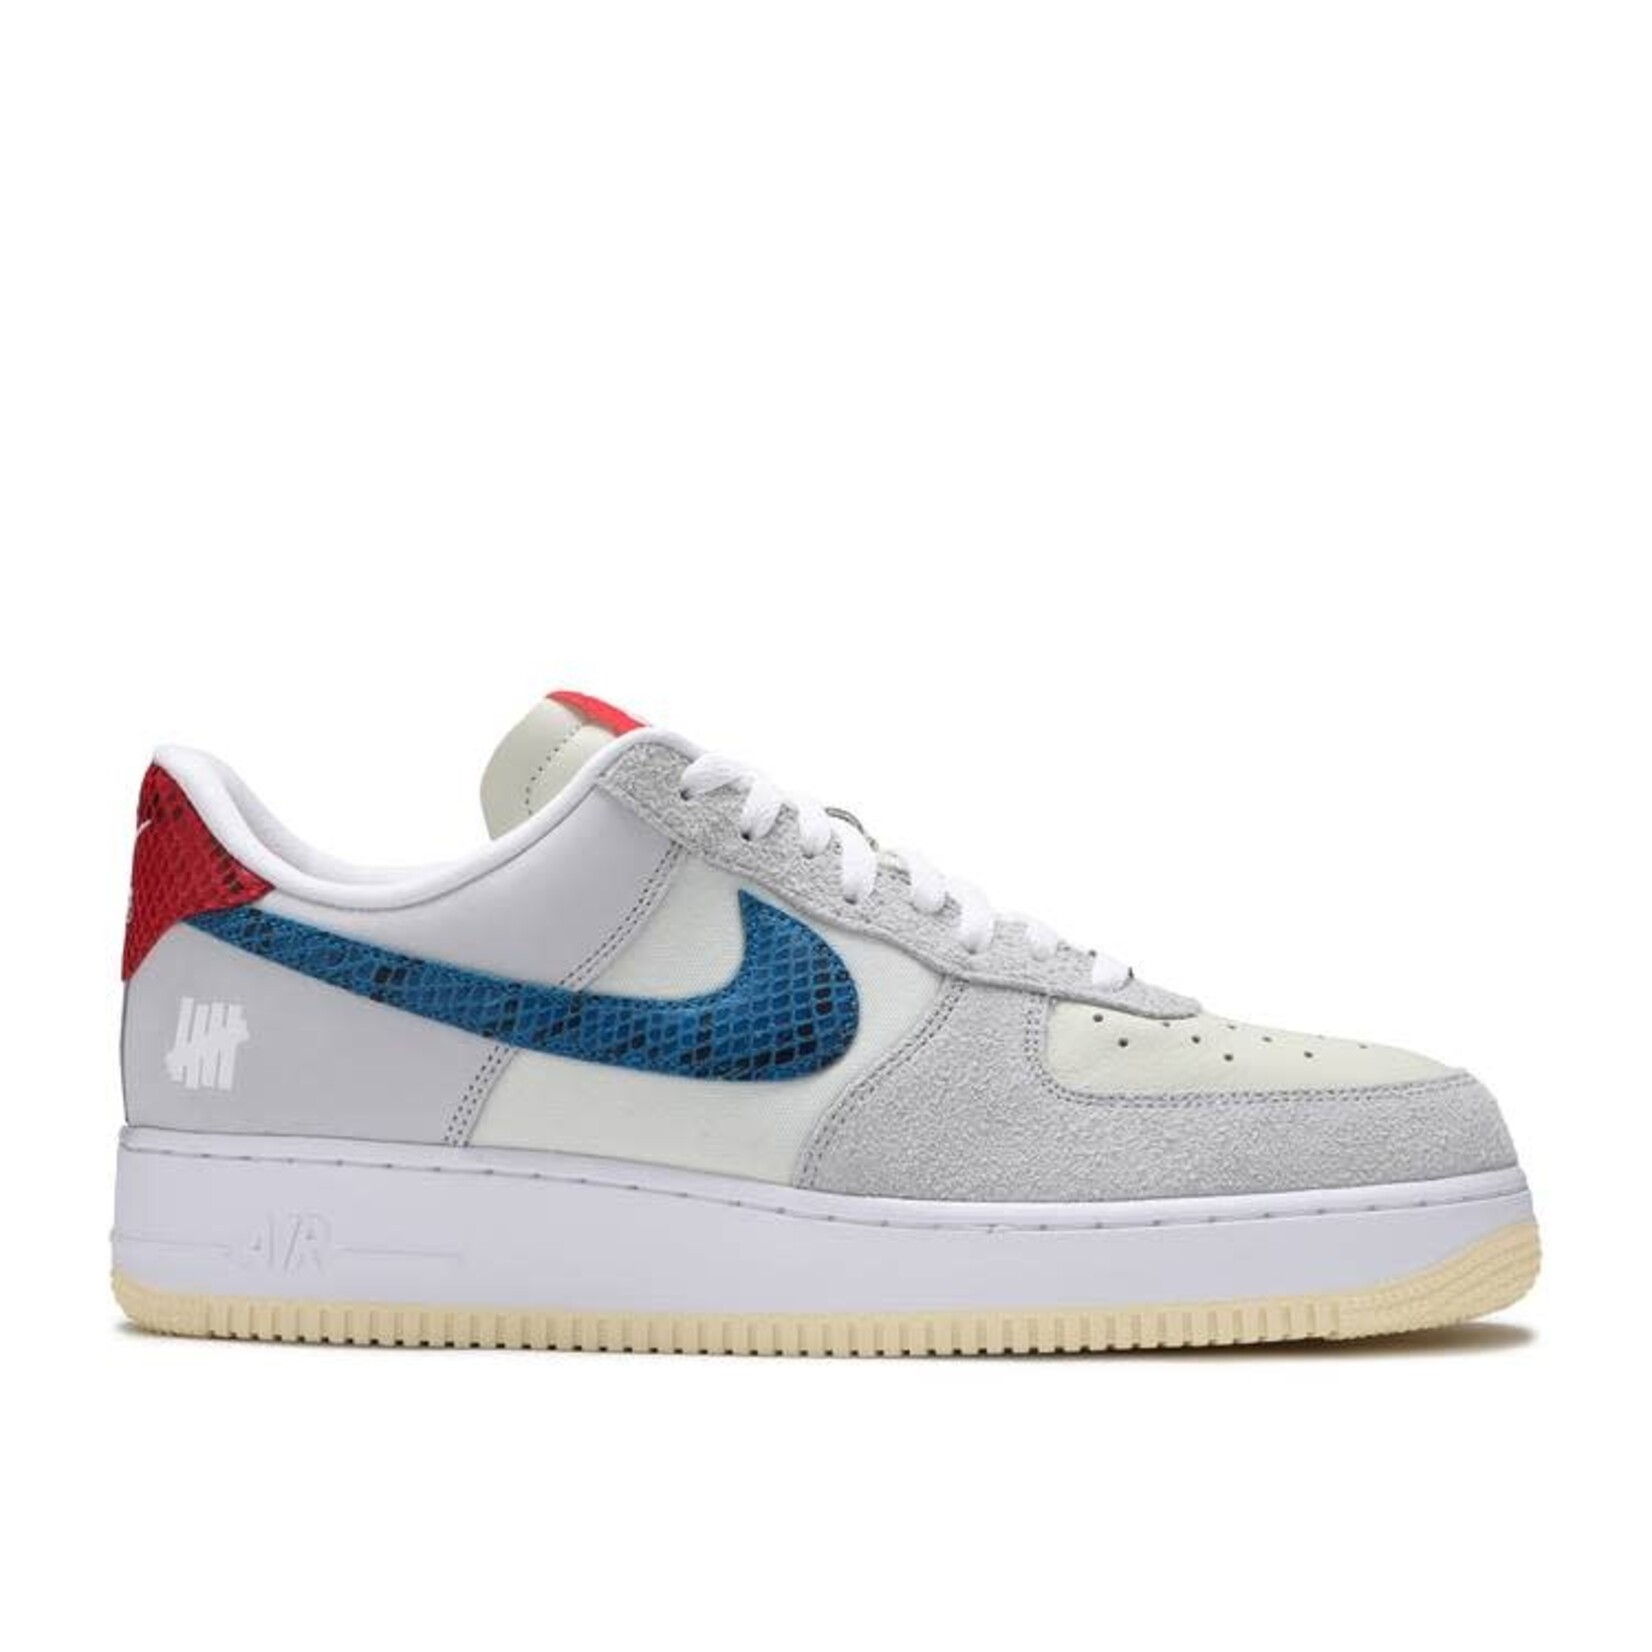 Nike Nike Air Force 1 Low SP Undefeated 5 On It Dunk vs. AF1 Size 12.5, DS BRAND NEW